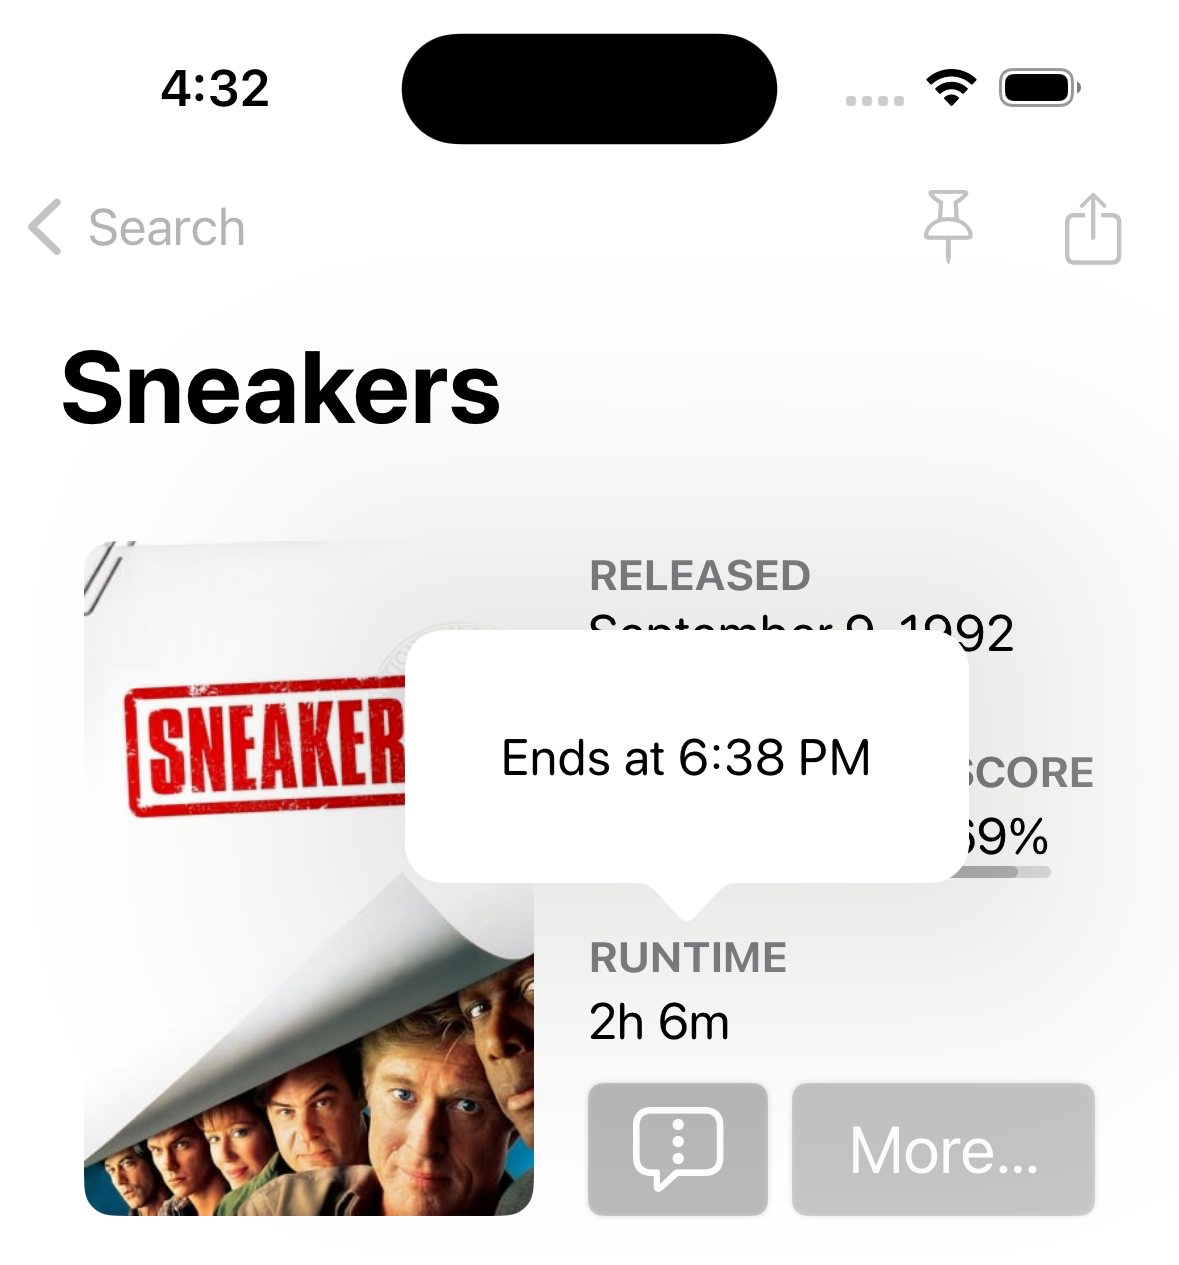 Screenshot showing the movie Sneakers, runtime 2 hours and six minutes. The screenshot was taken at 4:32 and a popover shows that it will end at 6:38